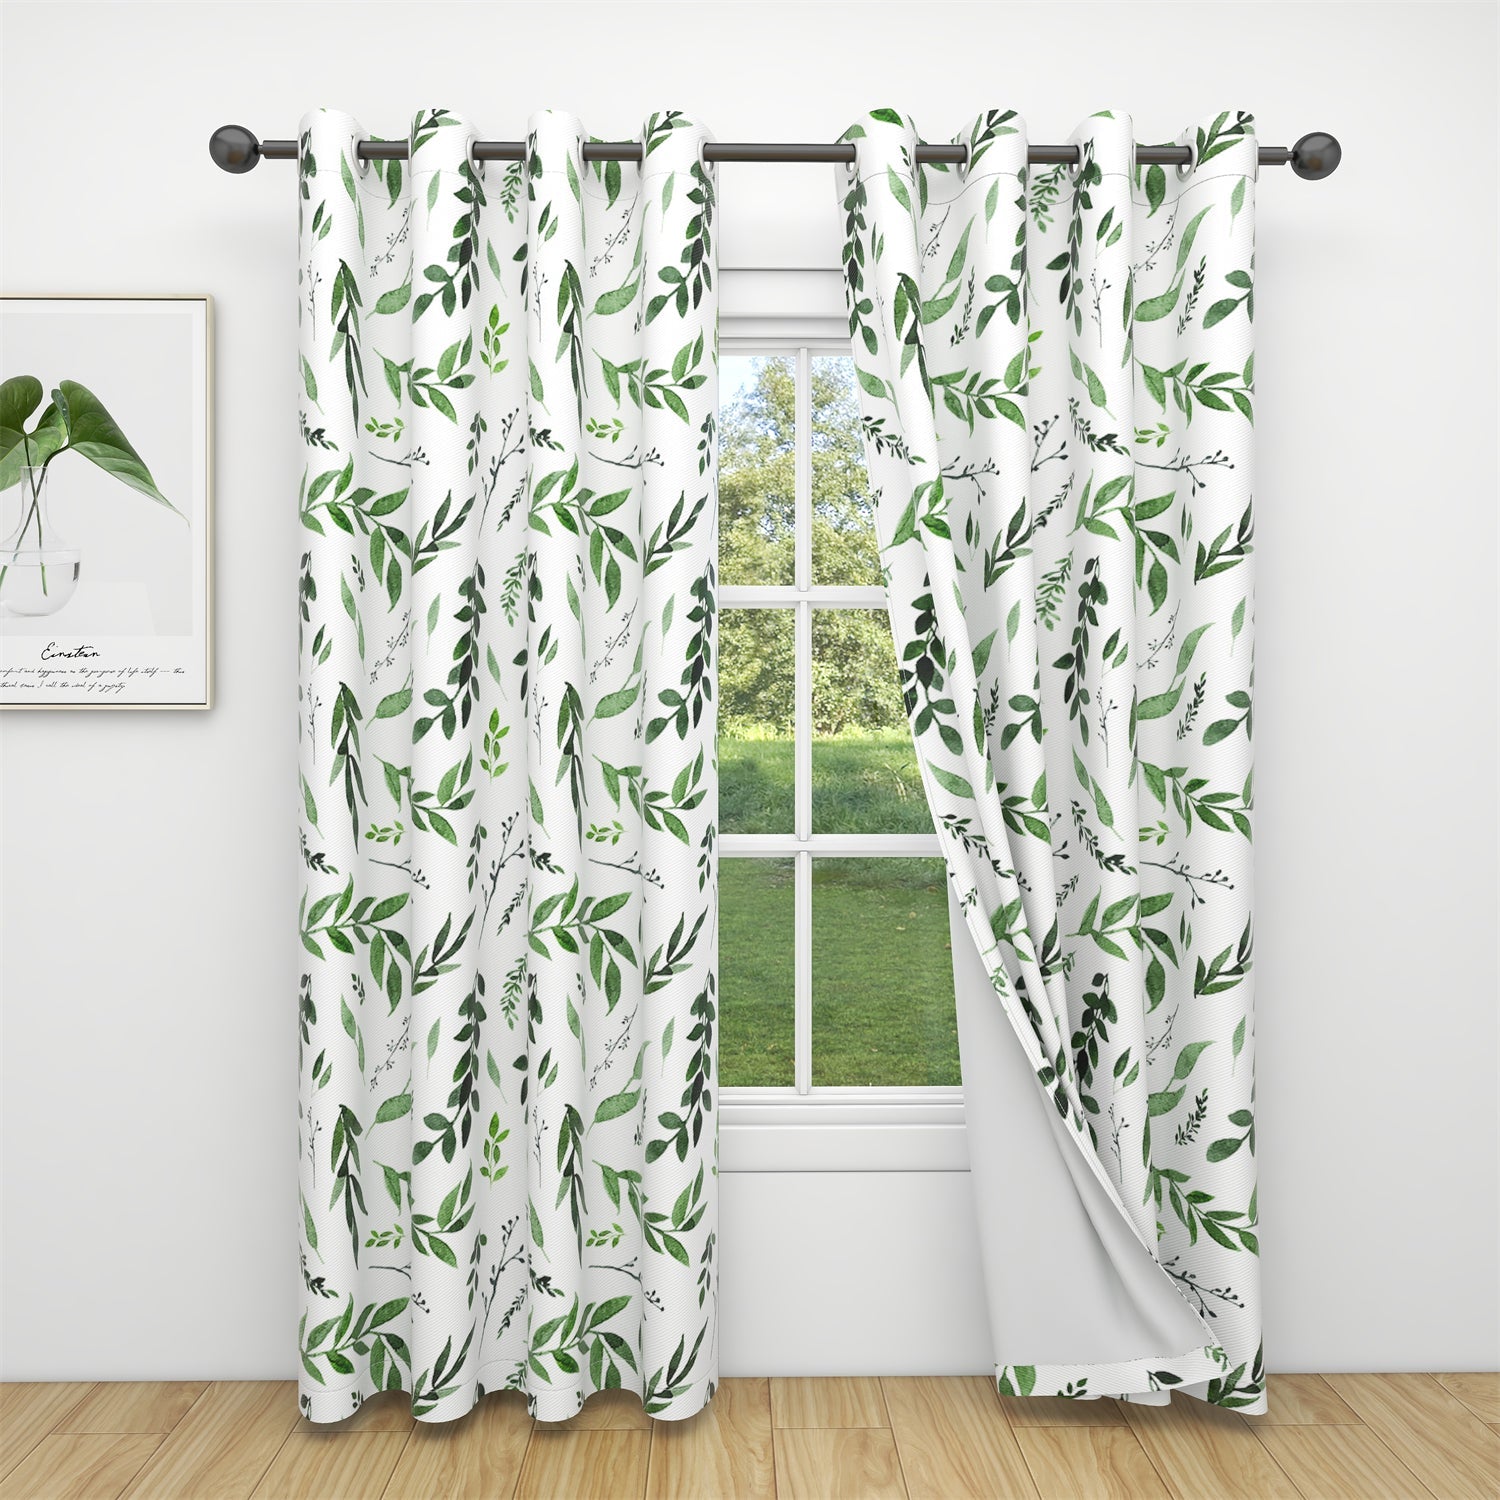 Grommet Blackout White Leaves Curtains For Living Room And Bedroom 2 Panels KGORGE Store